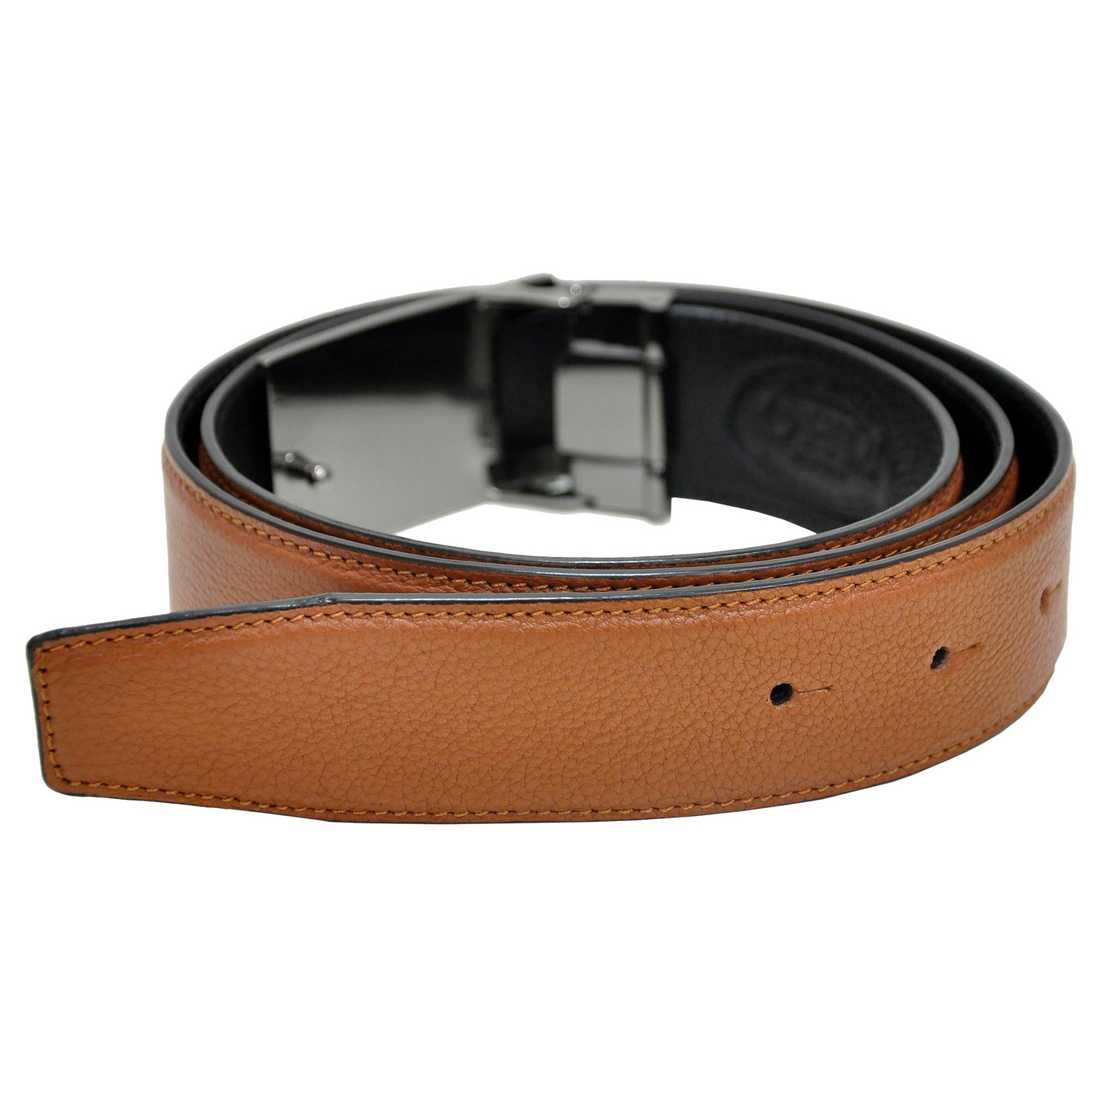 OHM New York Leather Reversible Plaque Buckle Handmade Belts